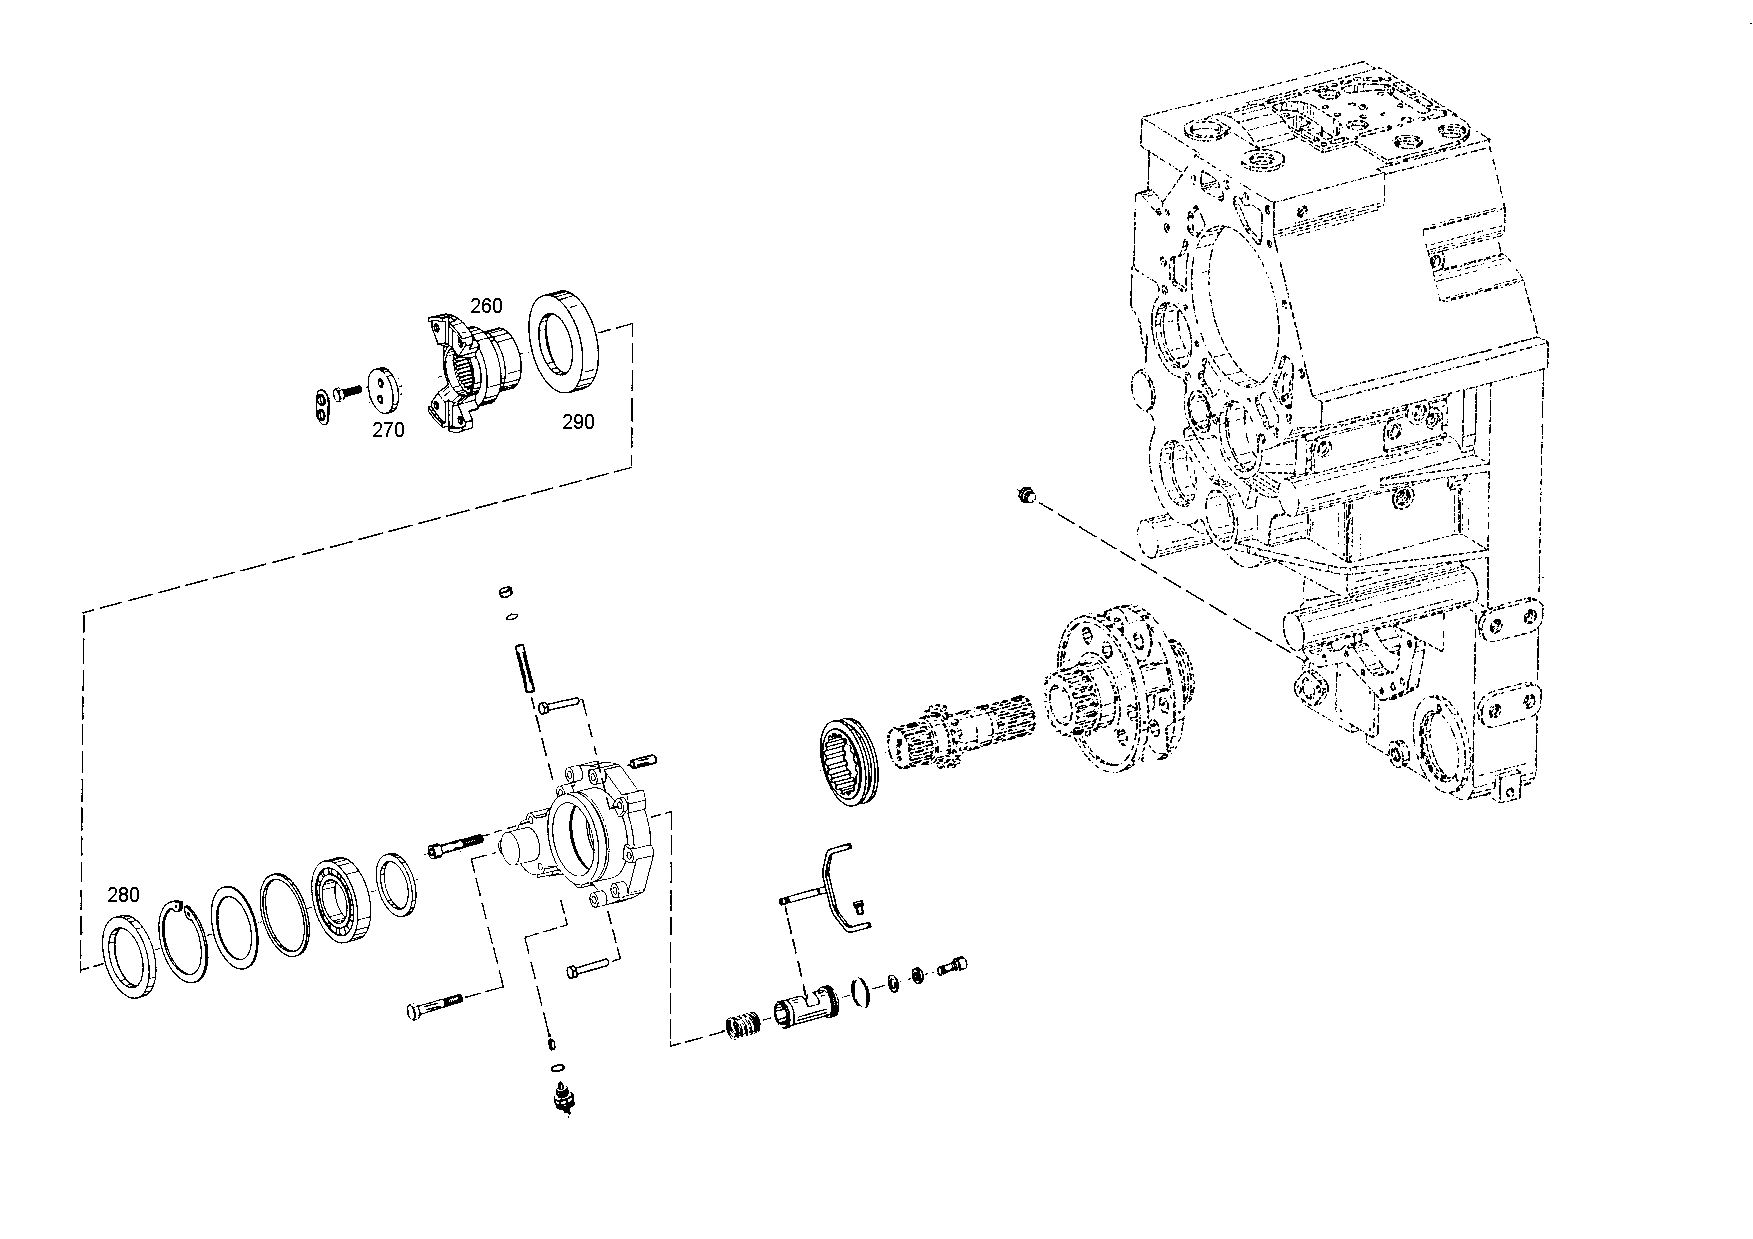 drawing for MOXY TRUCKS AS 352011 - OUTPUT FLANGE